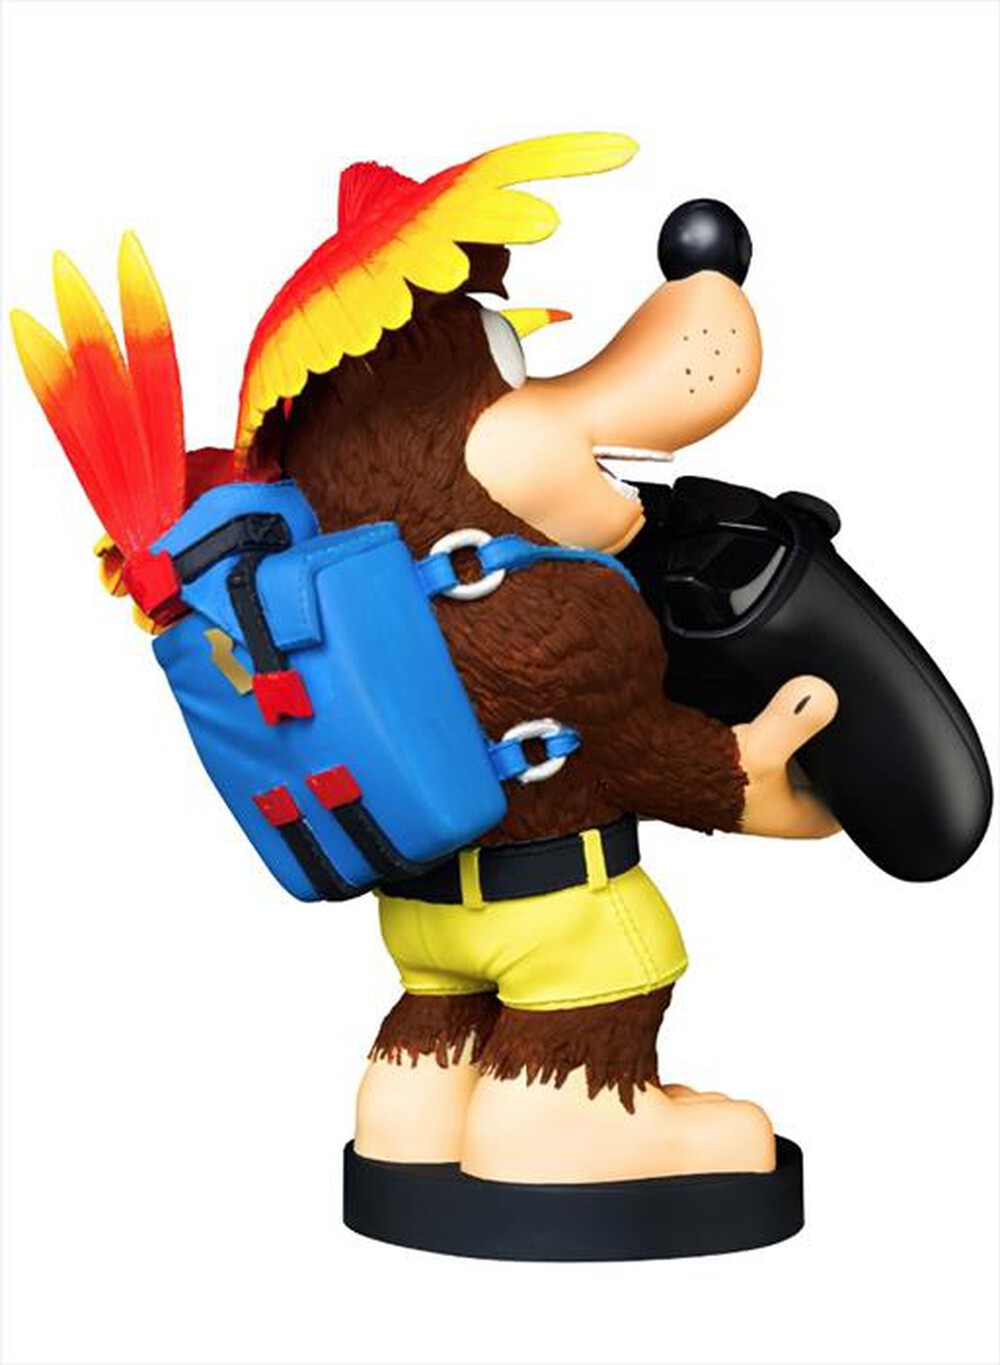 "EXQUISITE GAMING - BANJO KAZOOIE CABLE GUY"